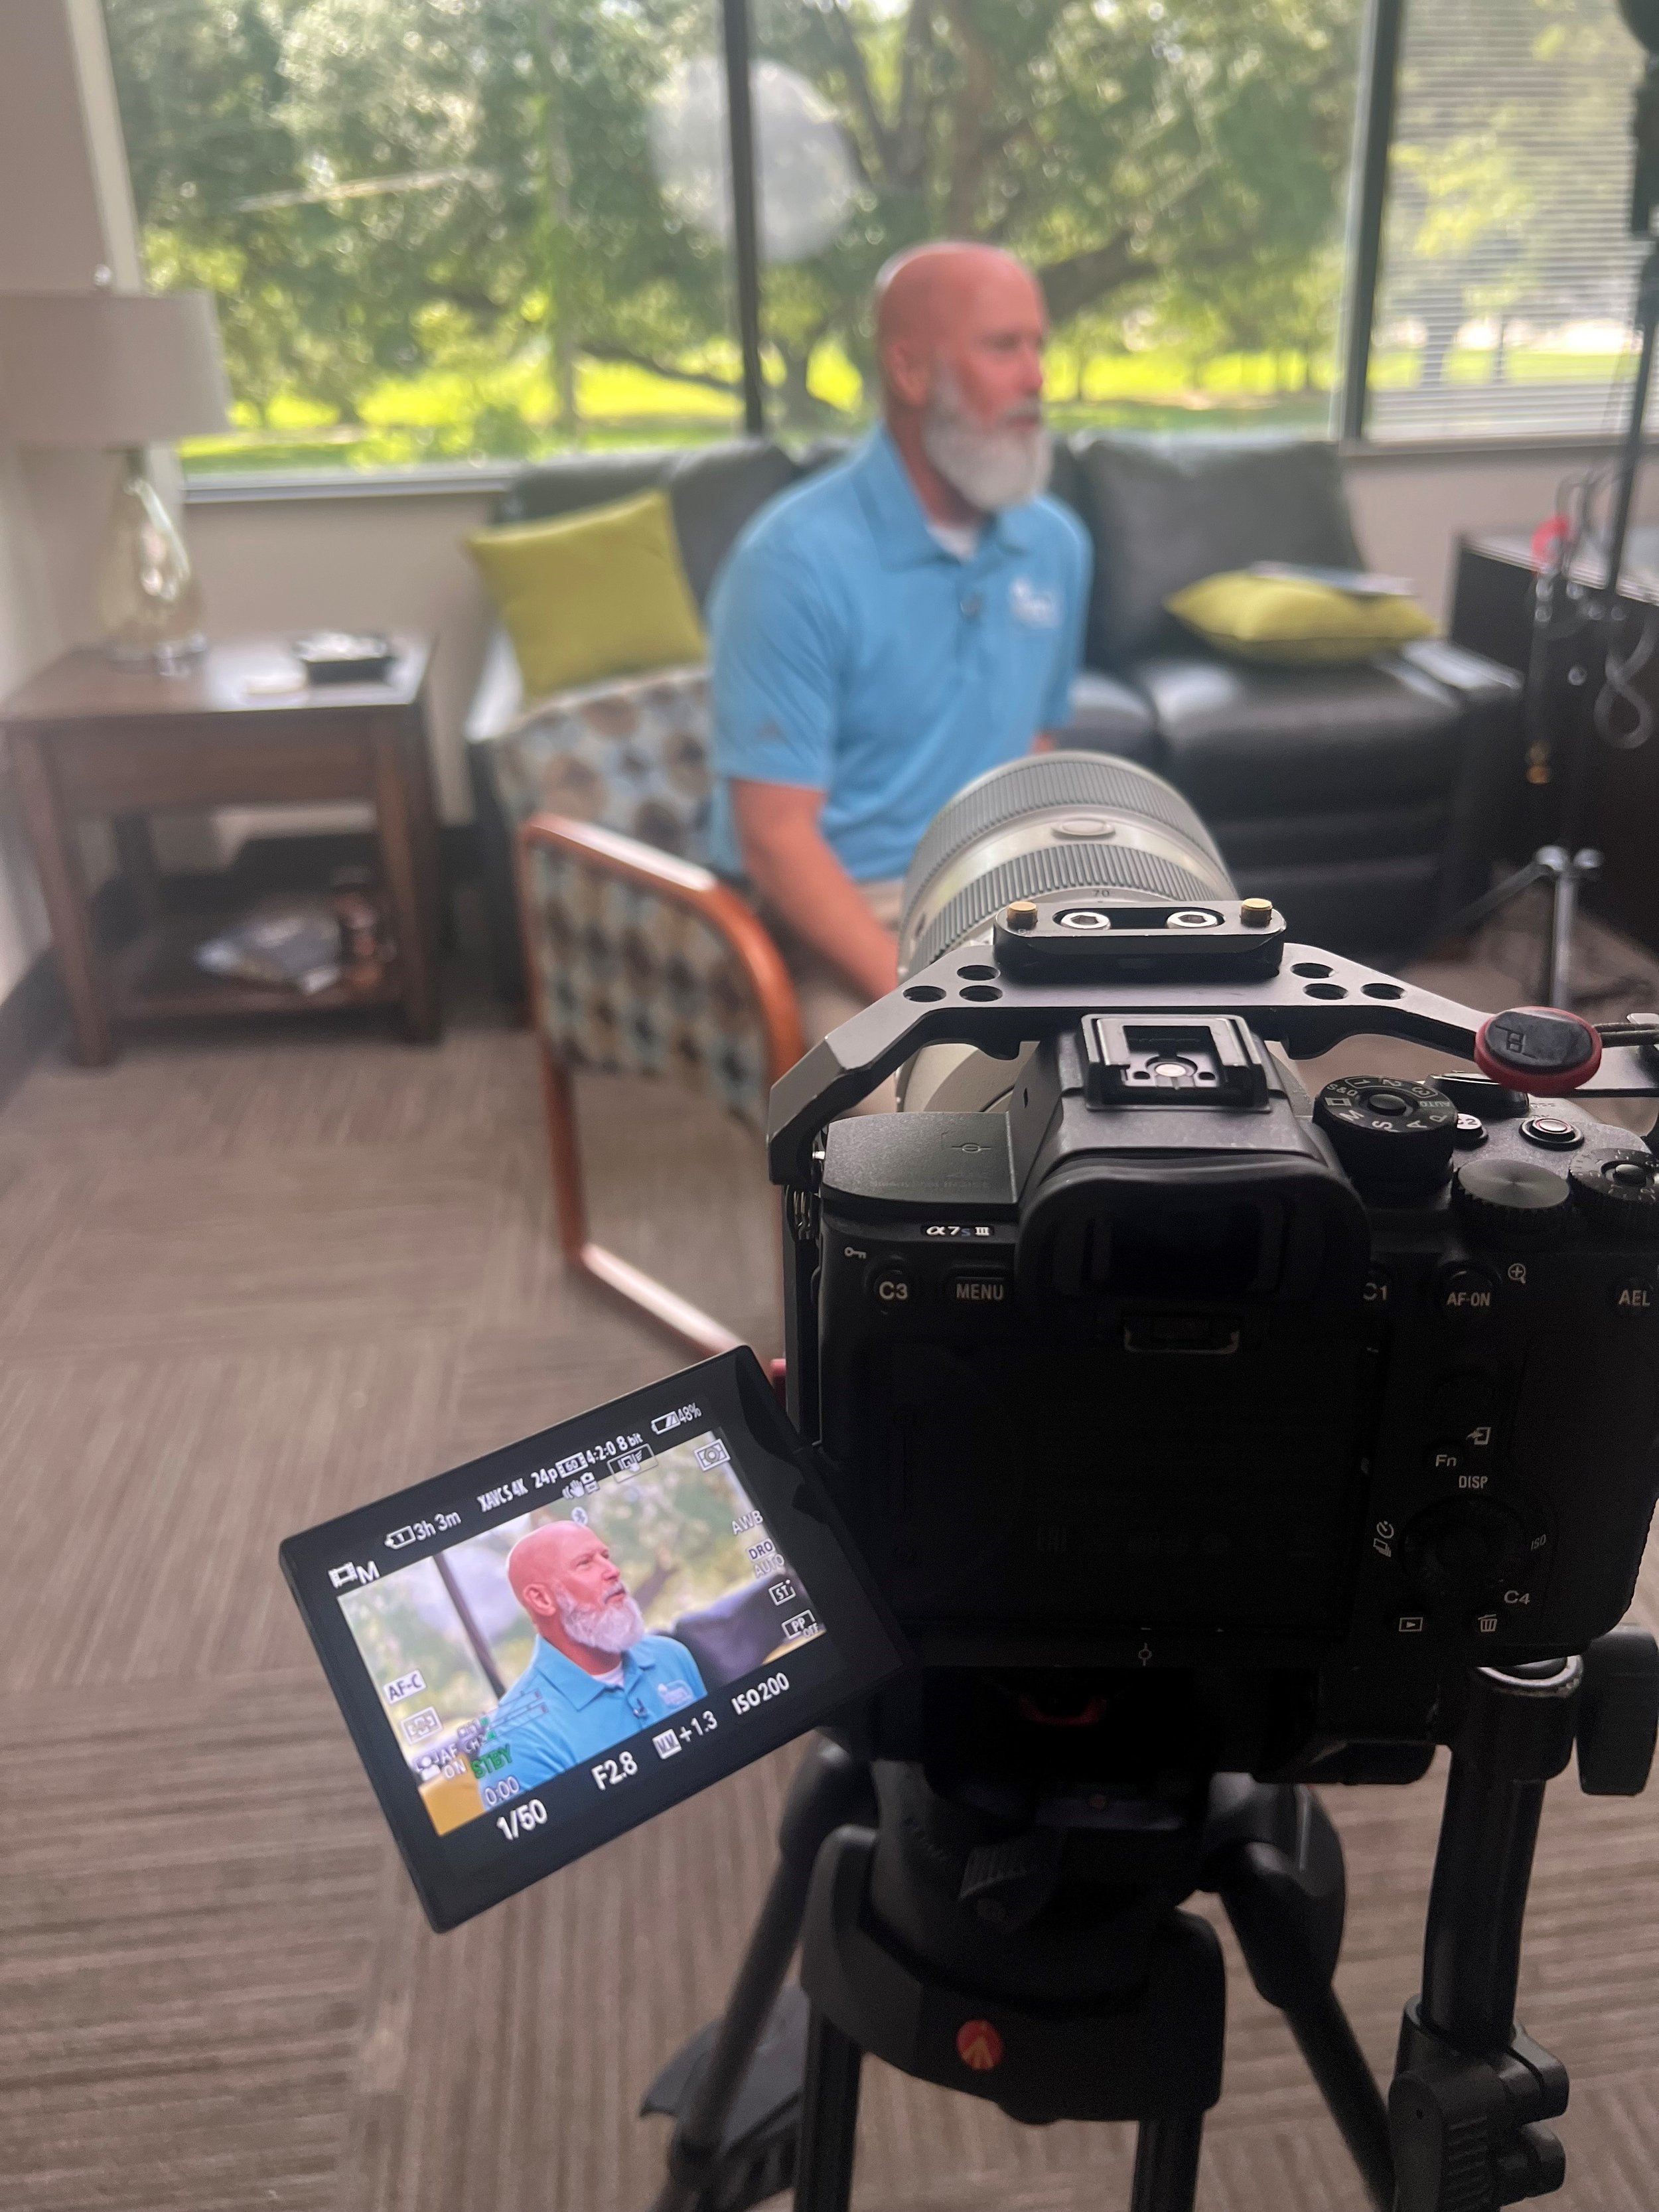  Day one of filming was an interview with Neighbors Federal Credit Union’s President Steve Webb. 